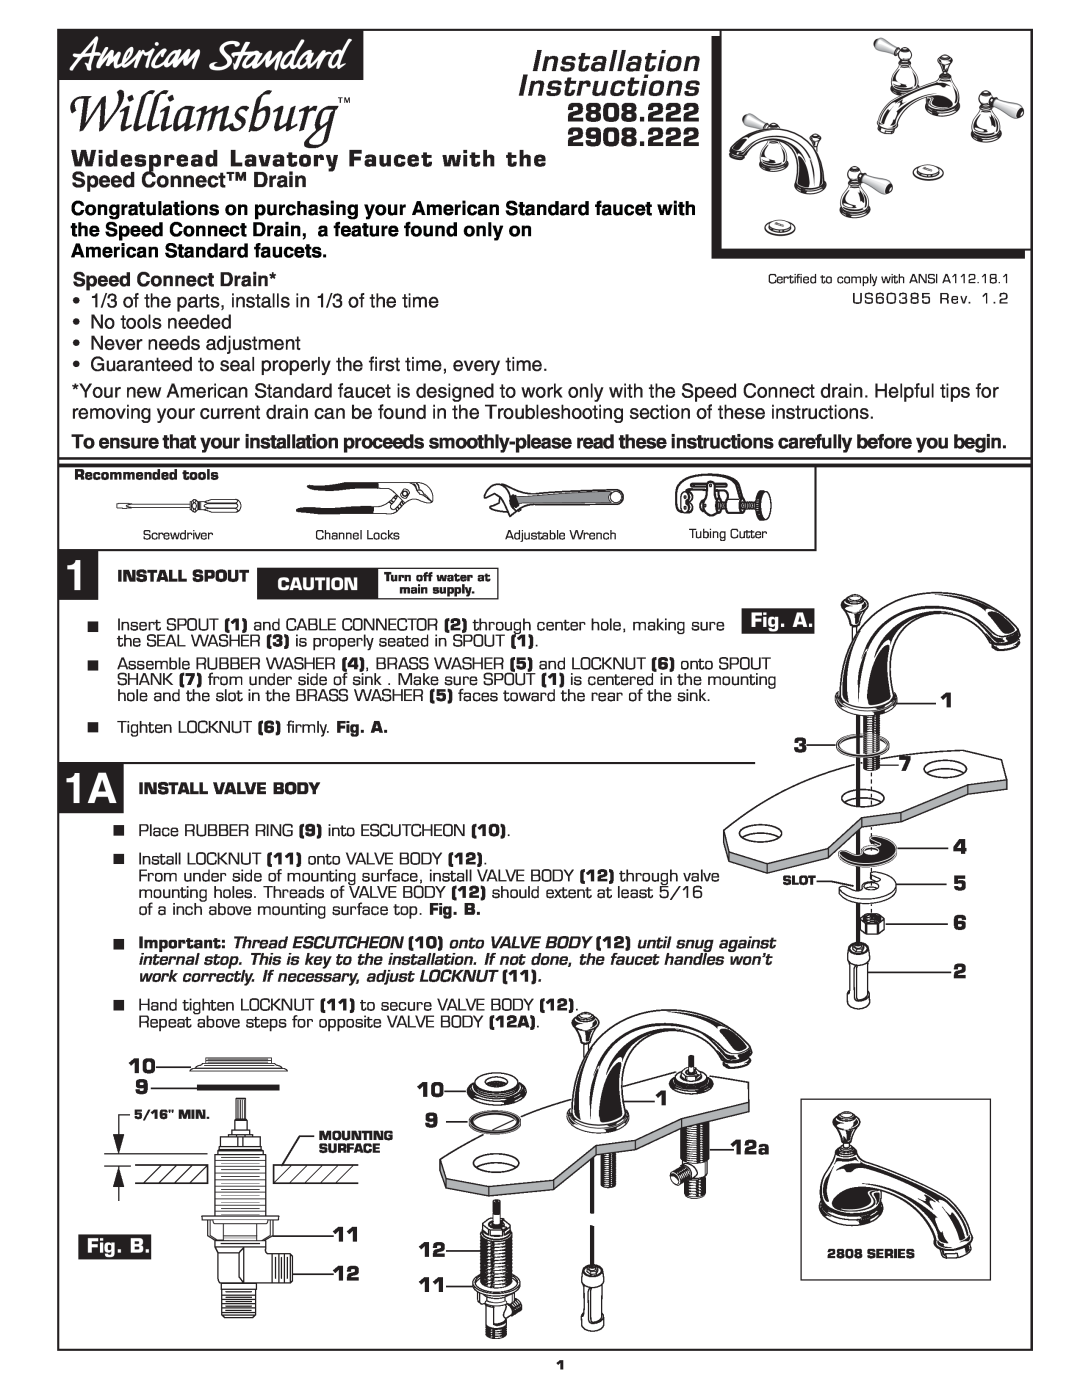 American Standard 2808.222 installation instructions Installation Instructions, Widespread Lavatory Faucet with the, 1 12a 